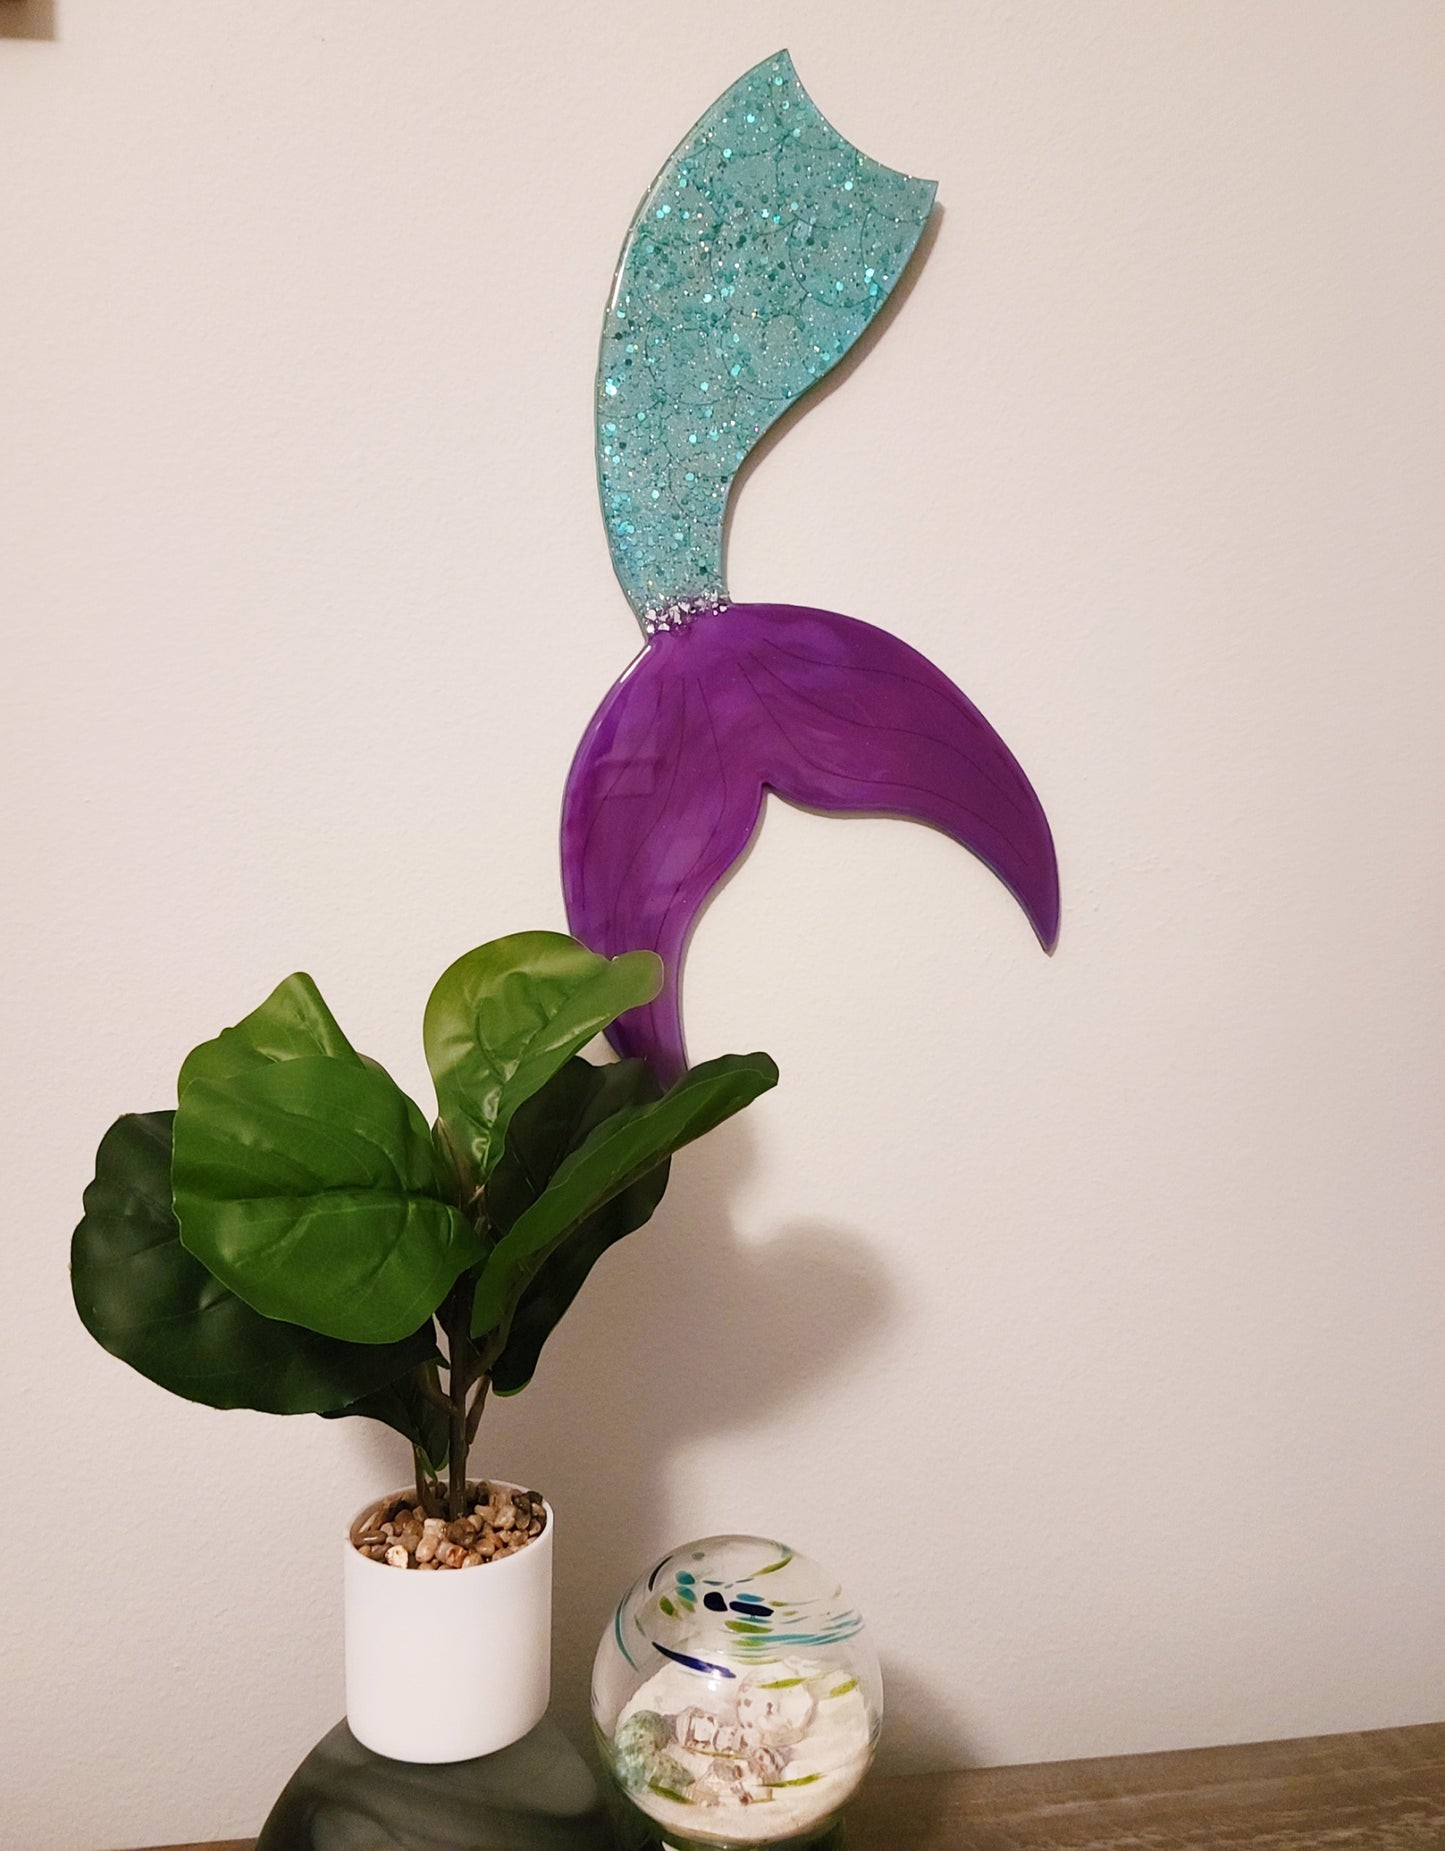 MDF Board is shaped like a mermaid tail.  The body portion is blue green with sparkles of chunky glitter and the tail is a bright purple.  A small amount of crushed glass separates the tail from the body.  The entire piece is covered in UV resistant resin.  Saw tooth hanger on the back. The approximate size is 19 x 9 inches.